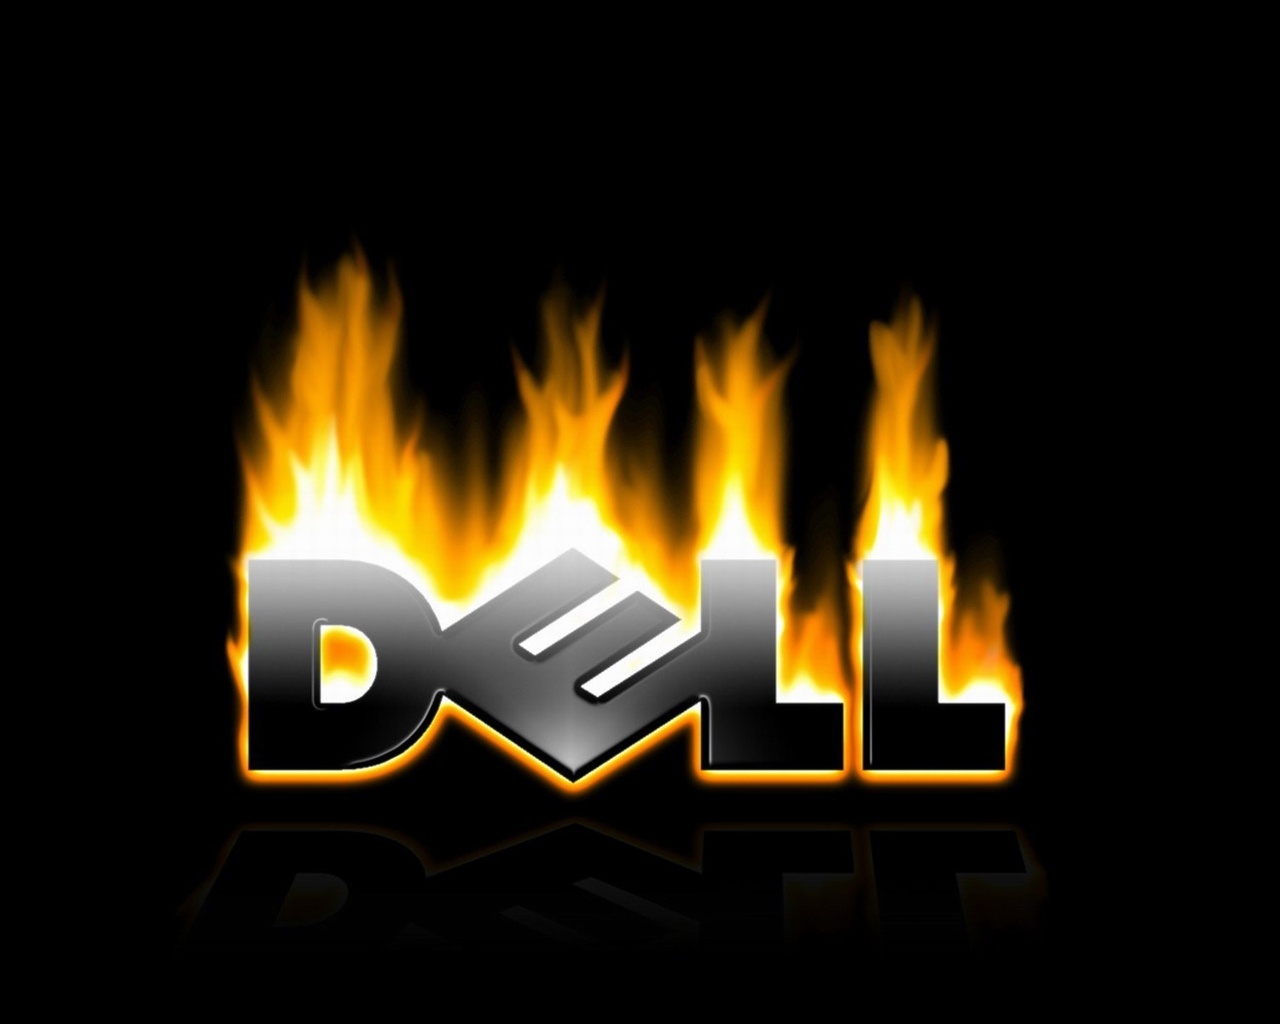 Dell in fire for 1280 x 1024 resolution